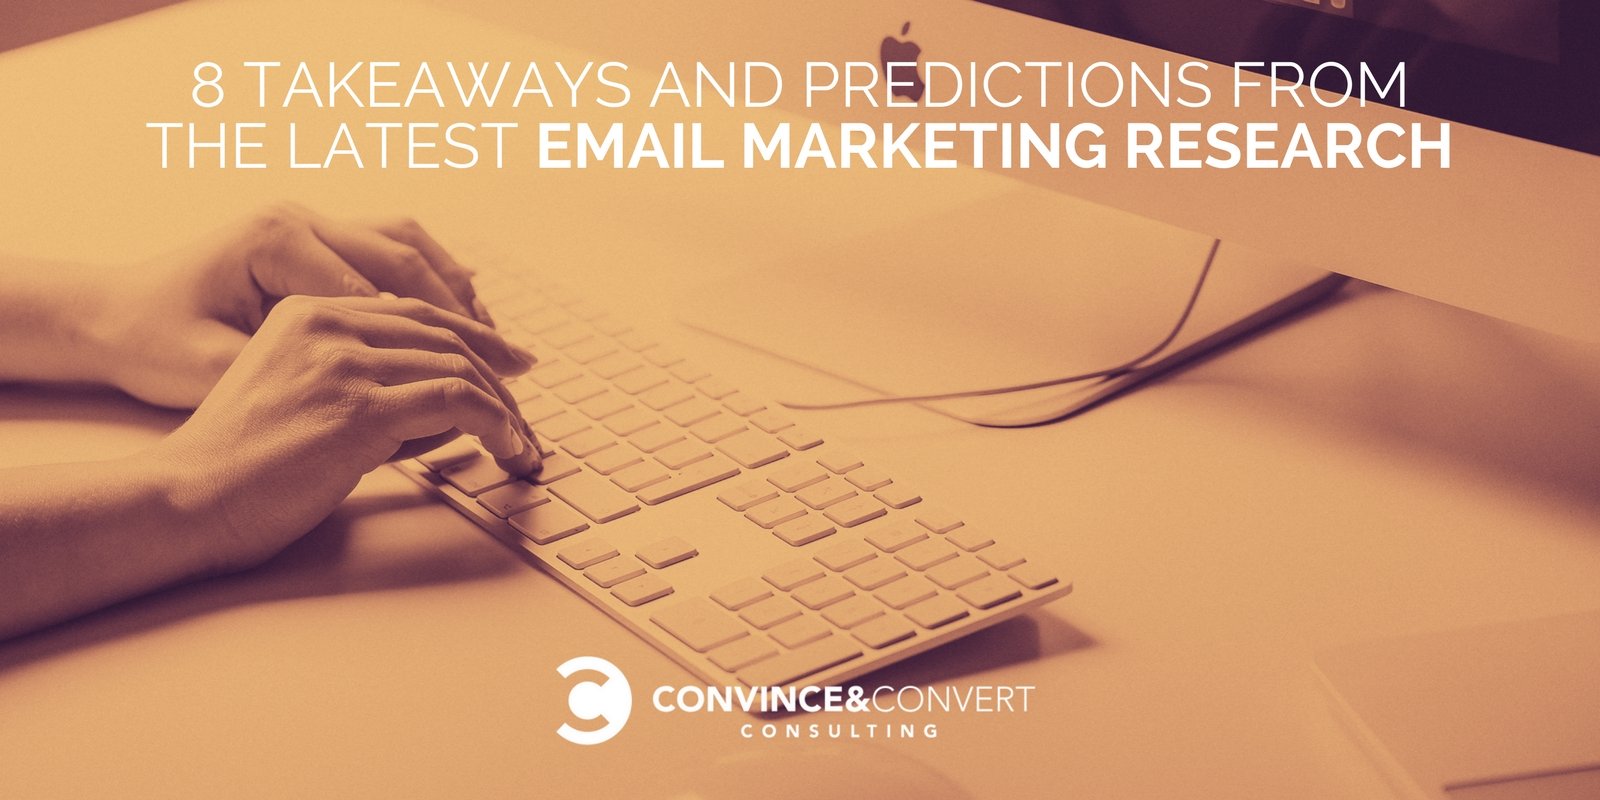 8 Takeaways and Predictions from the Latest Email Marketing Research